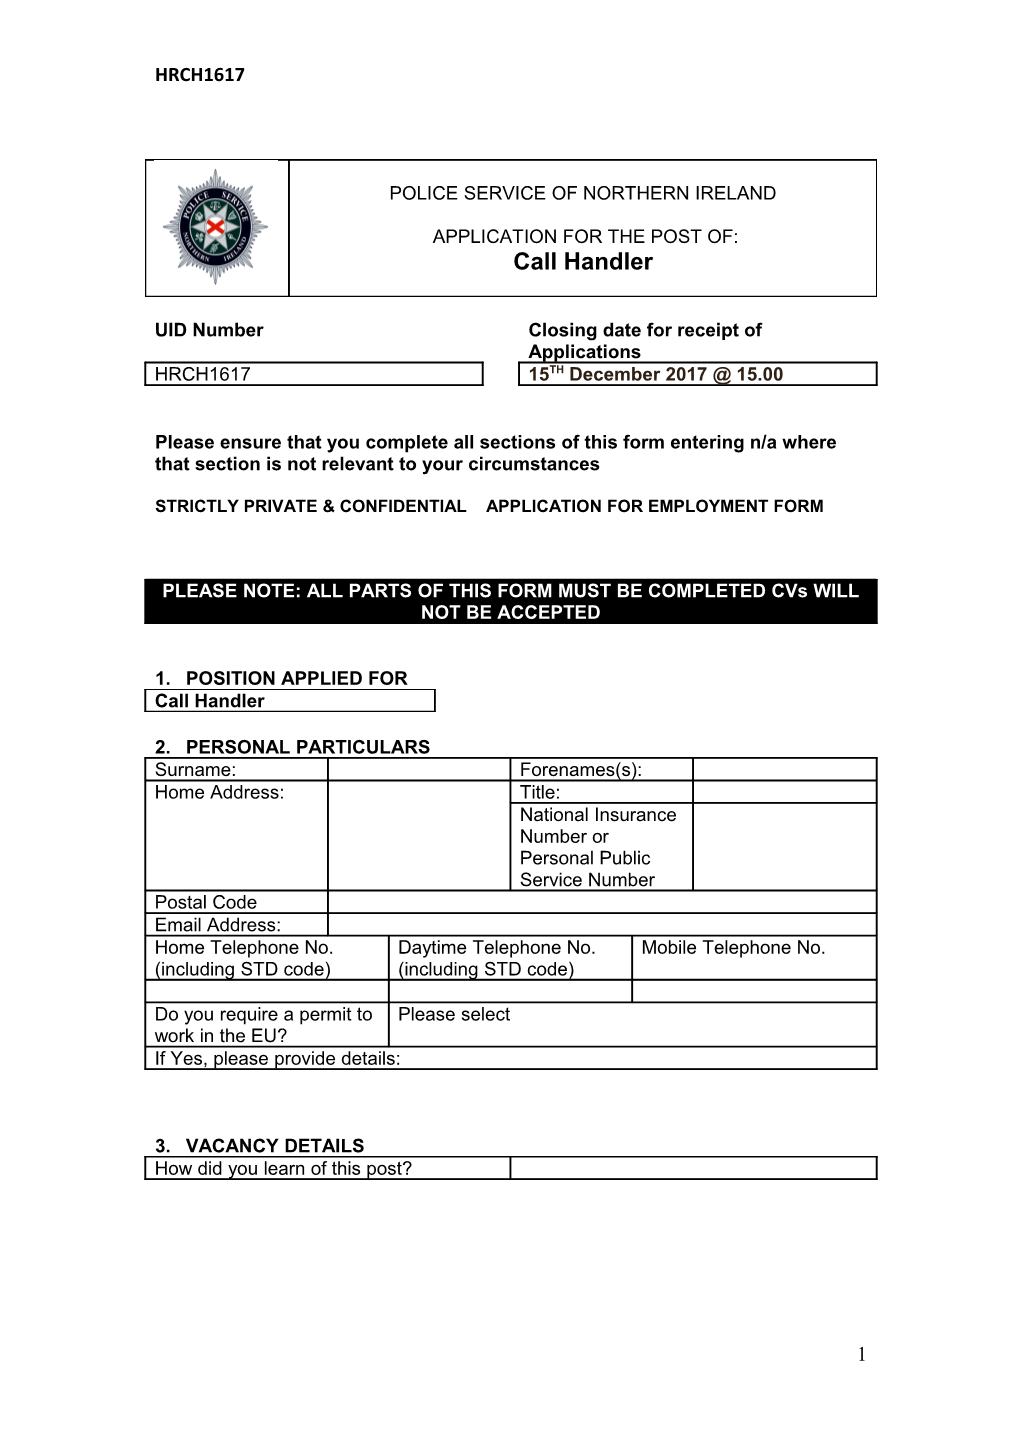 Strictly Private & Confidential Application for Employment Form